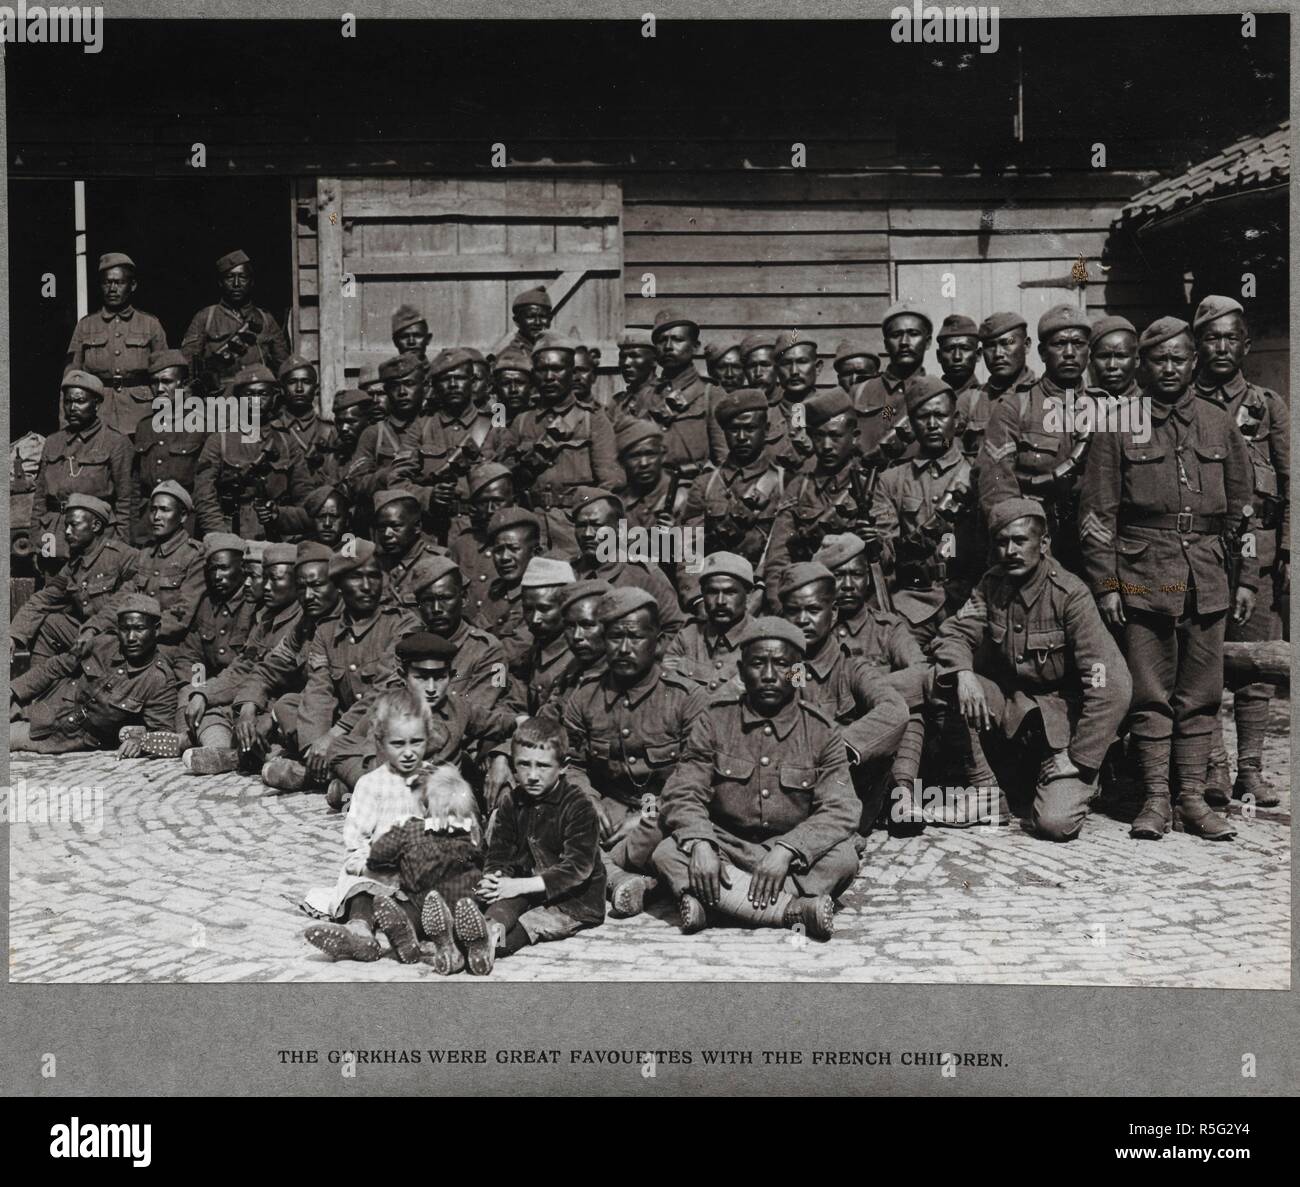 The Gurkhas were great favourites with the French children. Some young children pictured with a large group of Gurkhas. 'India Office Official Record of the Great War'. 22-Apr-21. The photographs appear in a variety of sizes, shapes and colours including shades of blue, green and brown. They record scenes of military life as experienced by the Indian and British armies in France during the First World War. Source: Photo 21/(69). Author: Girdwood, H. D. Stock Photo